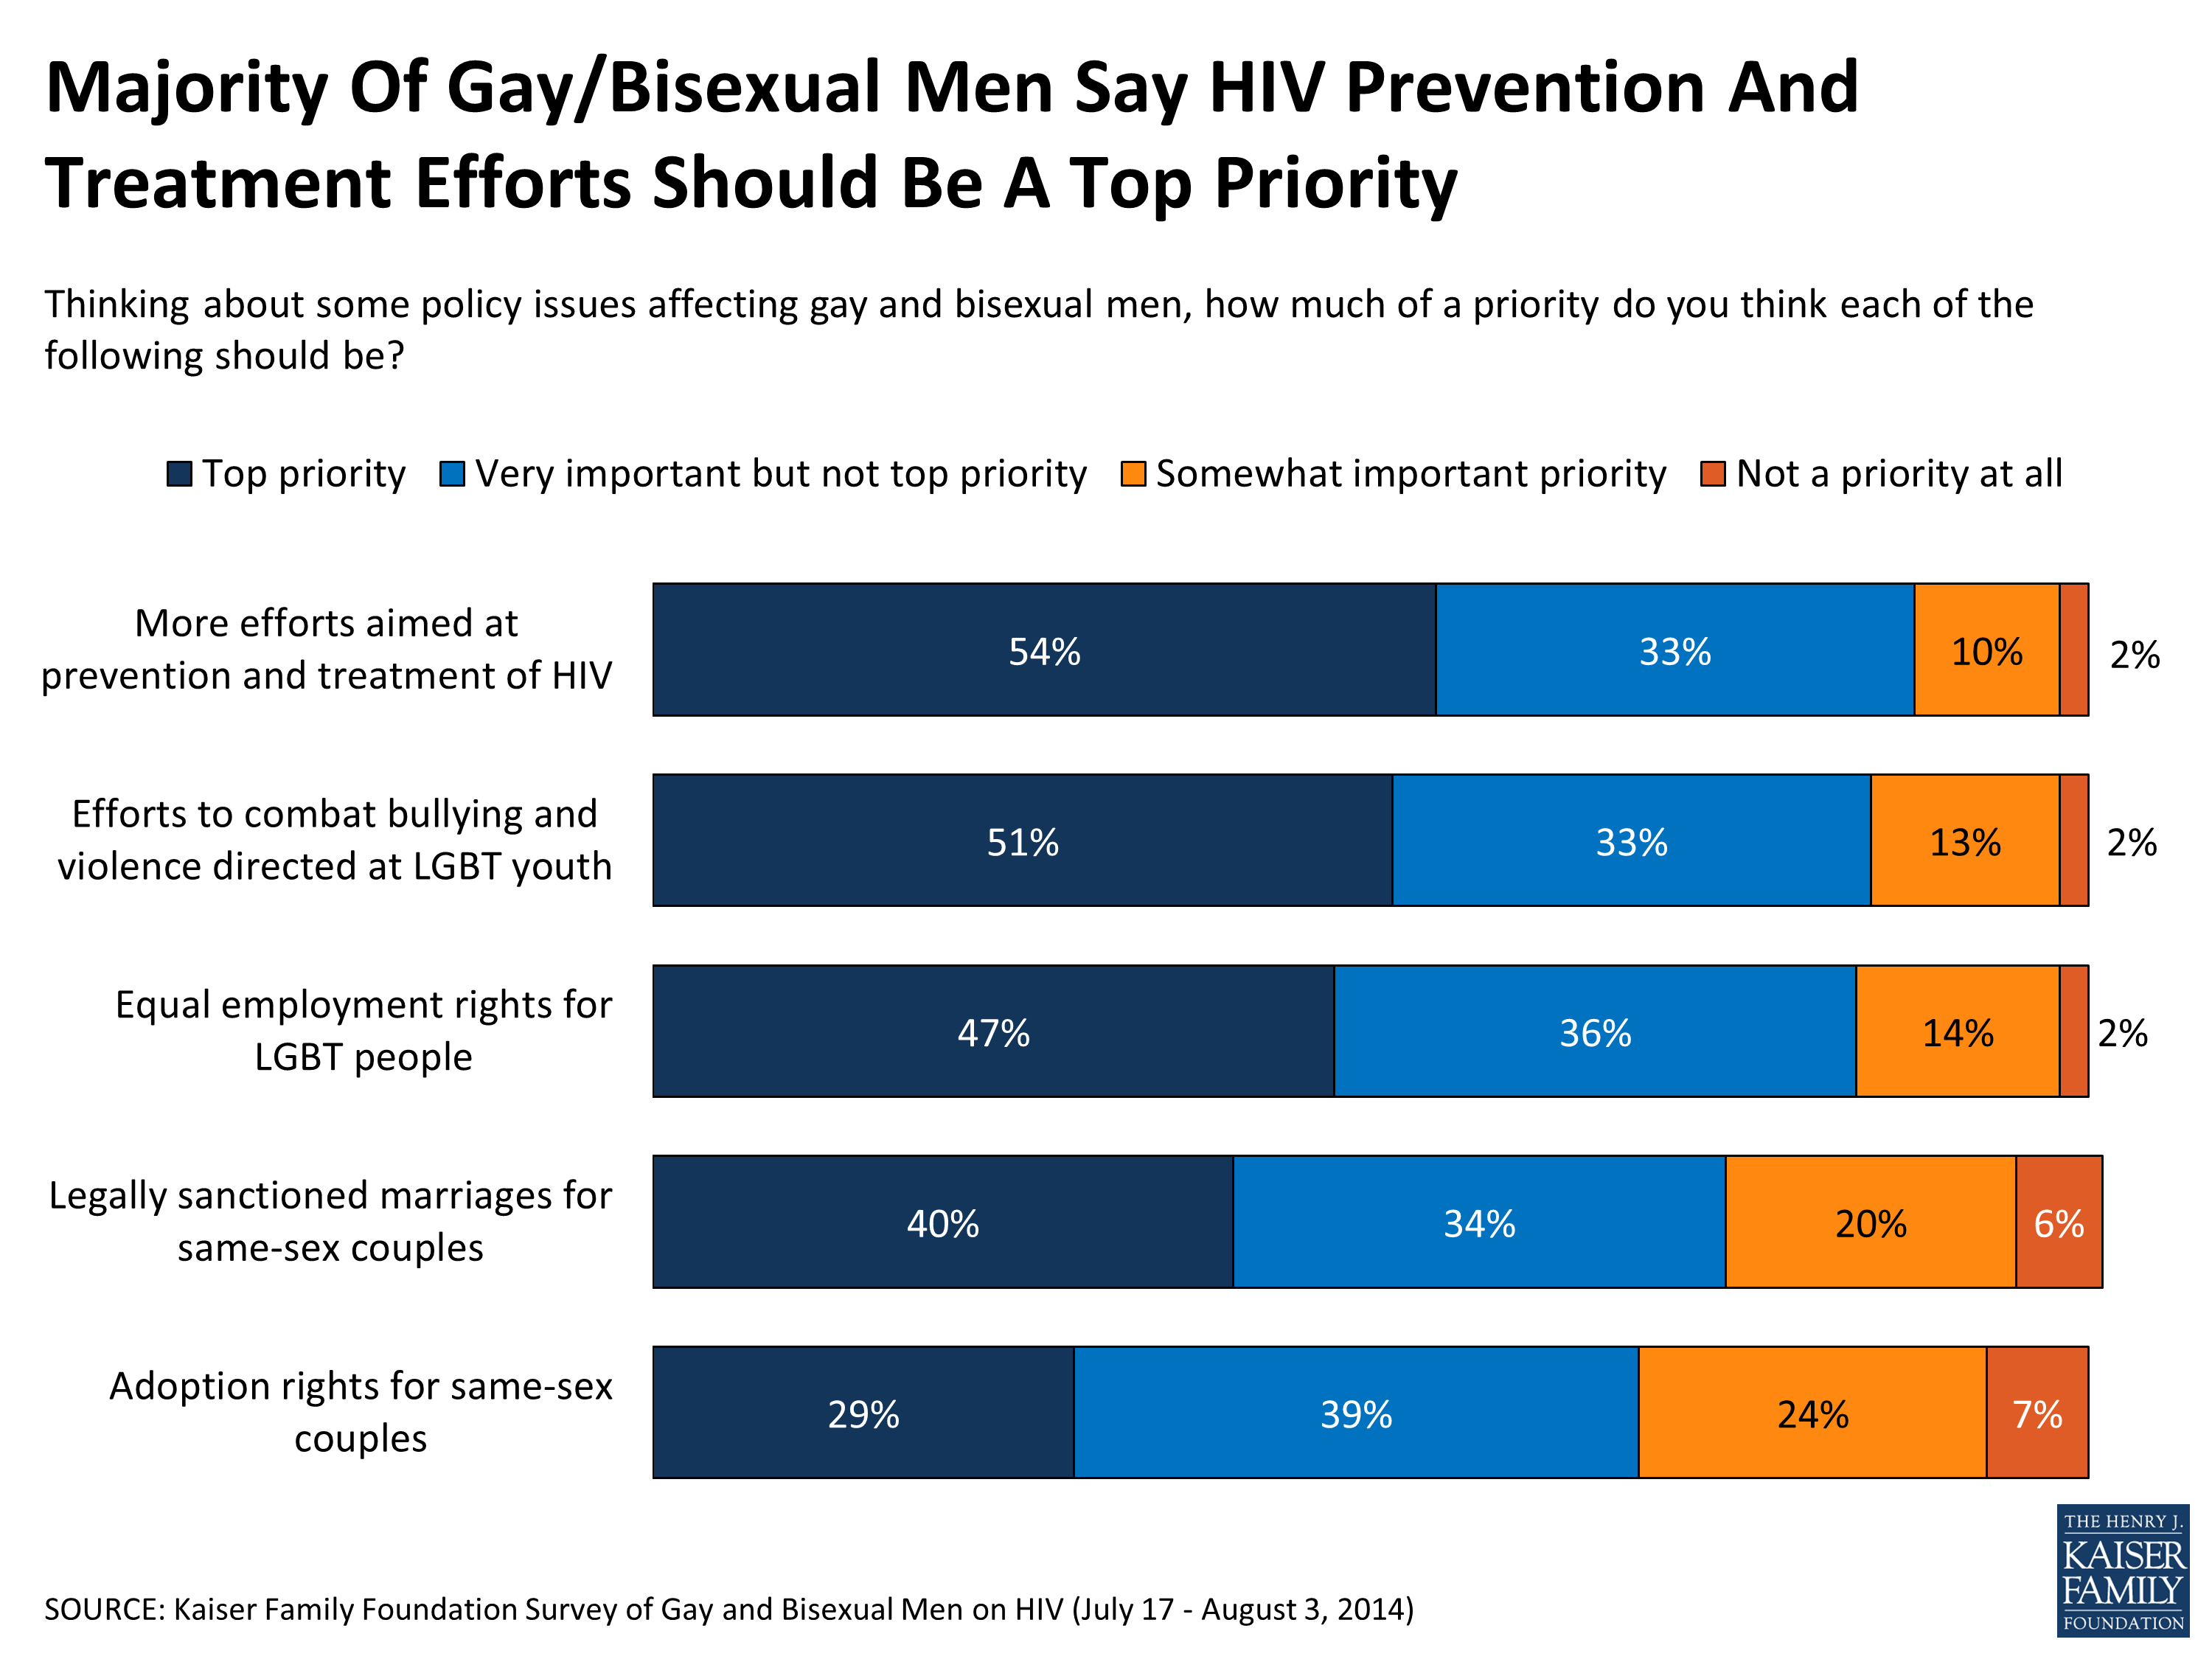 HIV/AIDS In The Lives Of Gay And Bisexual Men In The United States- Section 1 Importance Of HIV/AIDS As An Issue, Personal Concern, And Personal Connections- 8632 photo